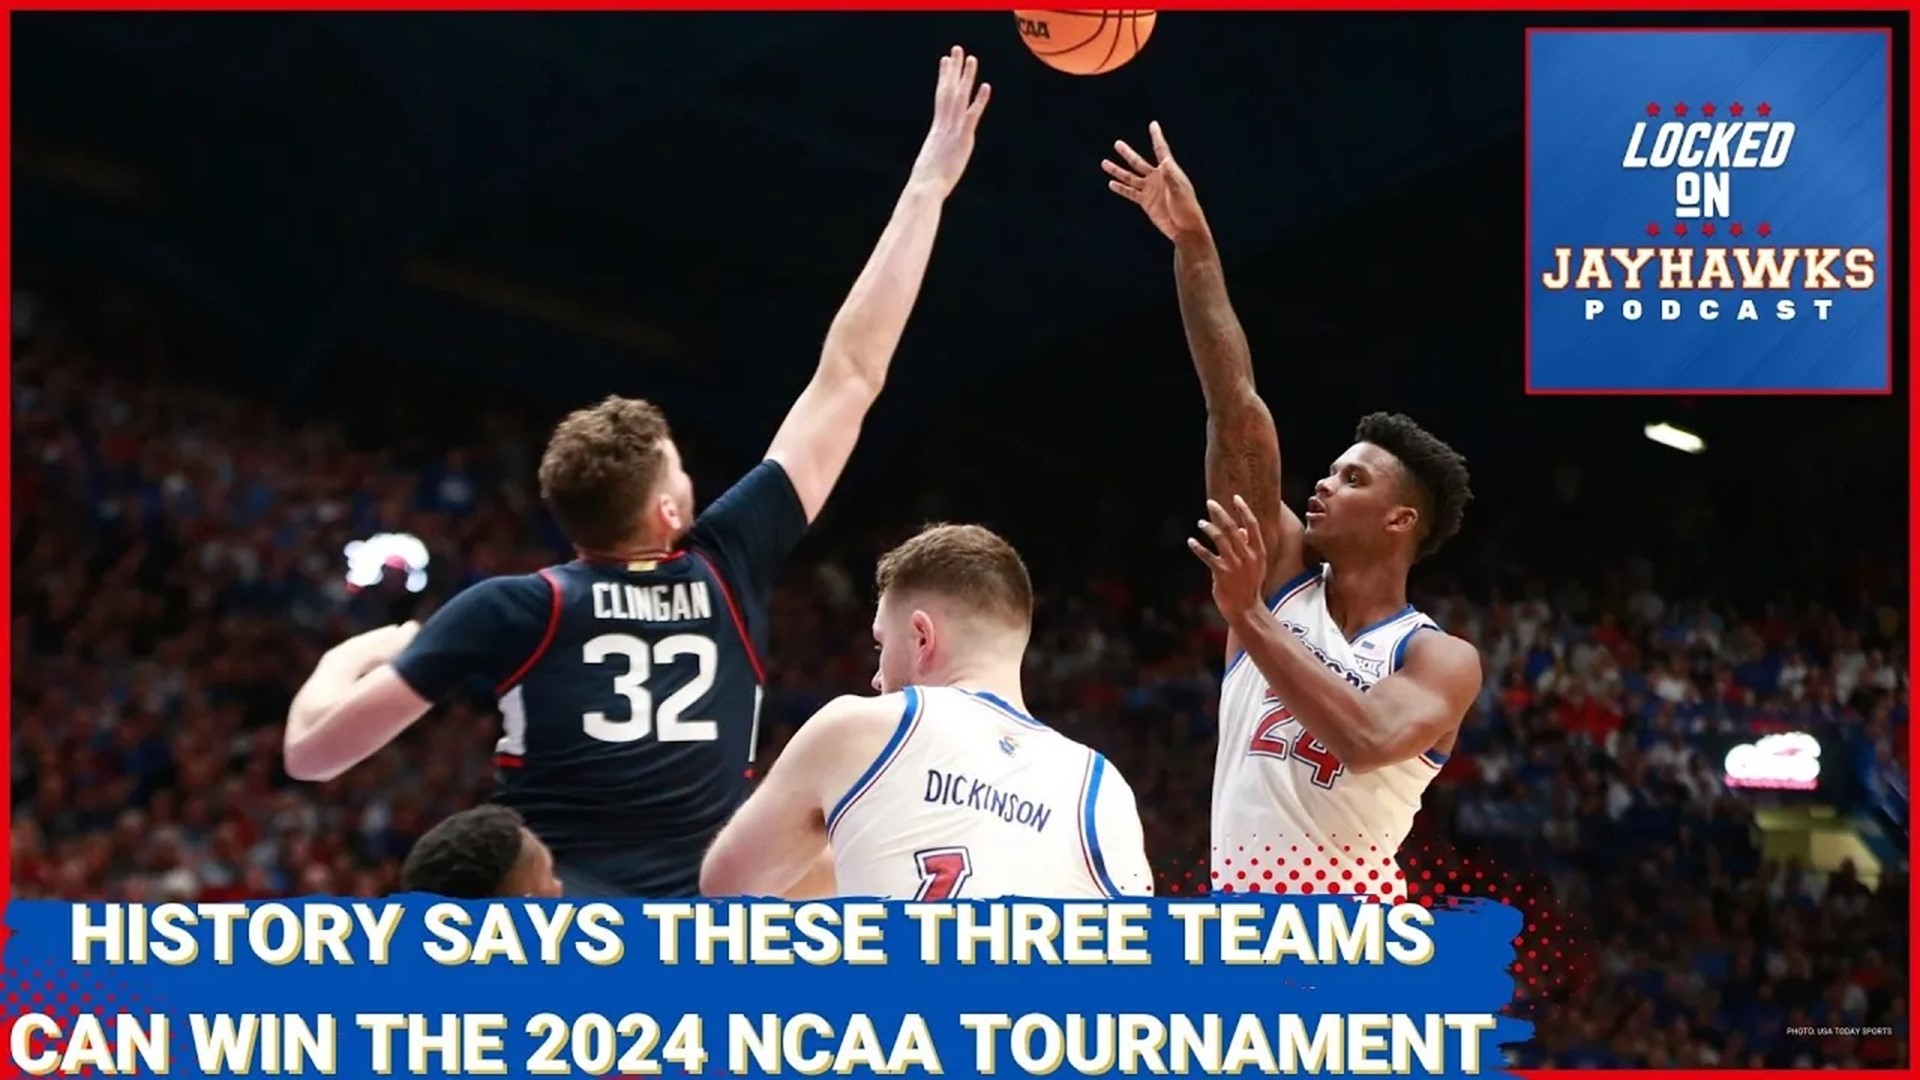 History and past parameters tell us three teams can win the National Championship in 2024 NCAA Tournament. Will those stats be right or wrong?